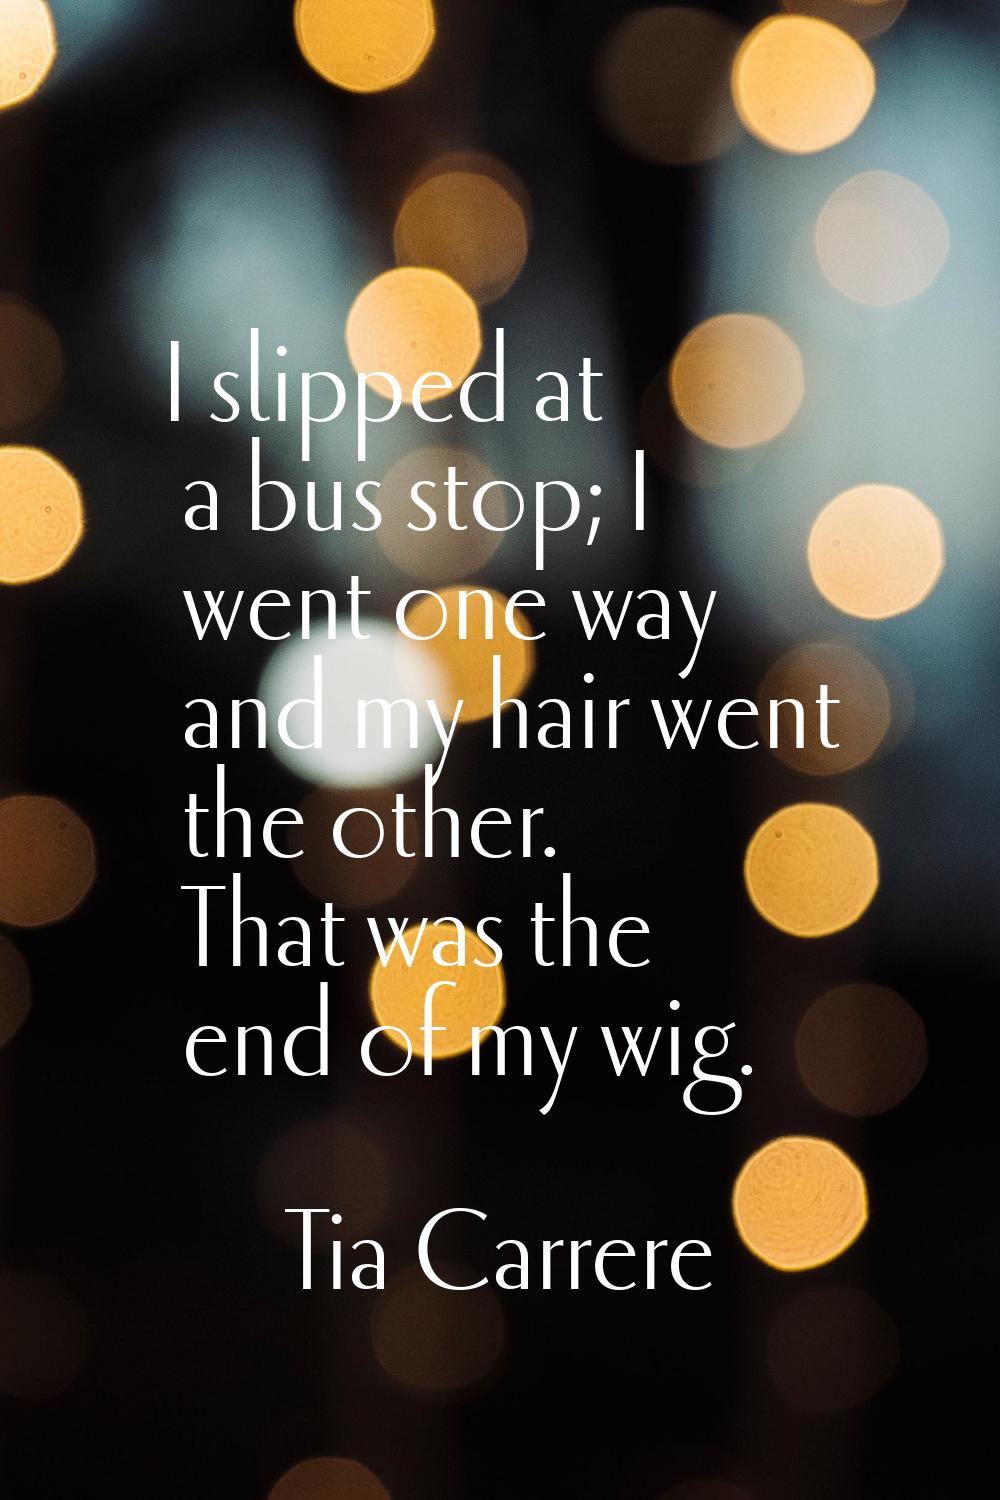 I slipped at a bus stop; I went one way and my hair went the other. That was the end of my wig.